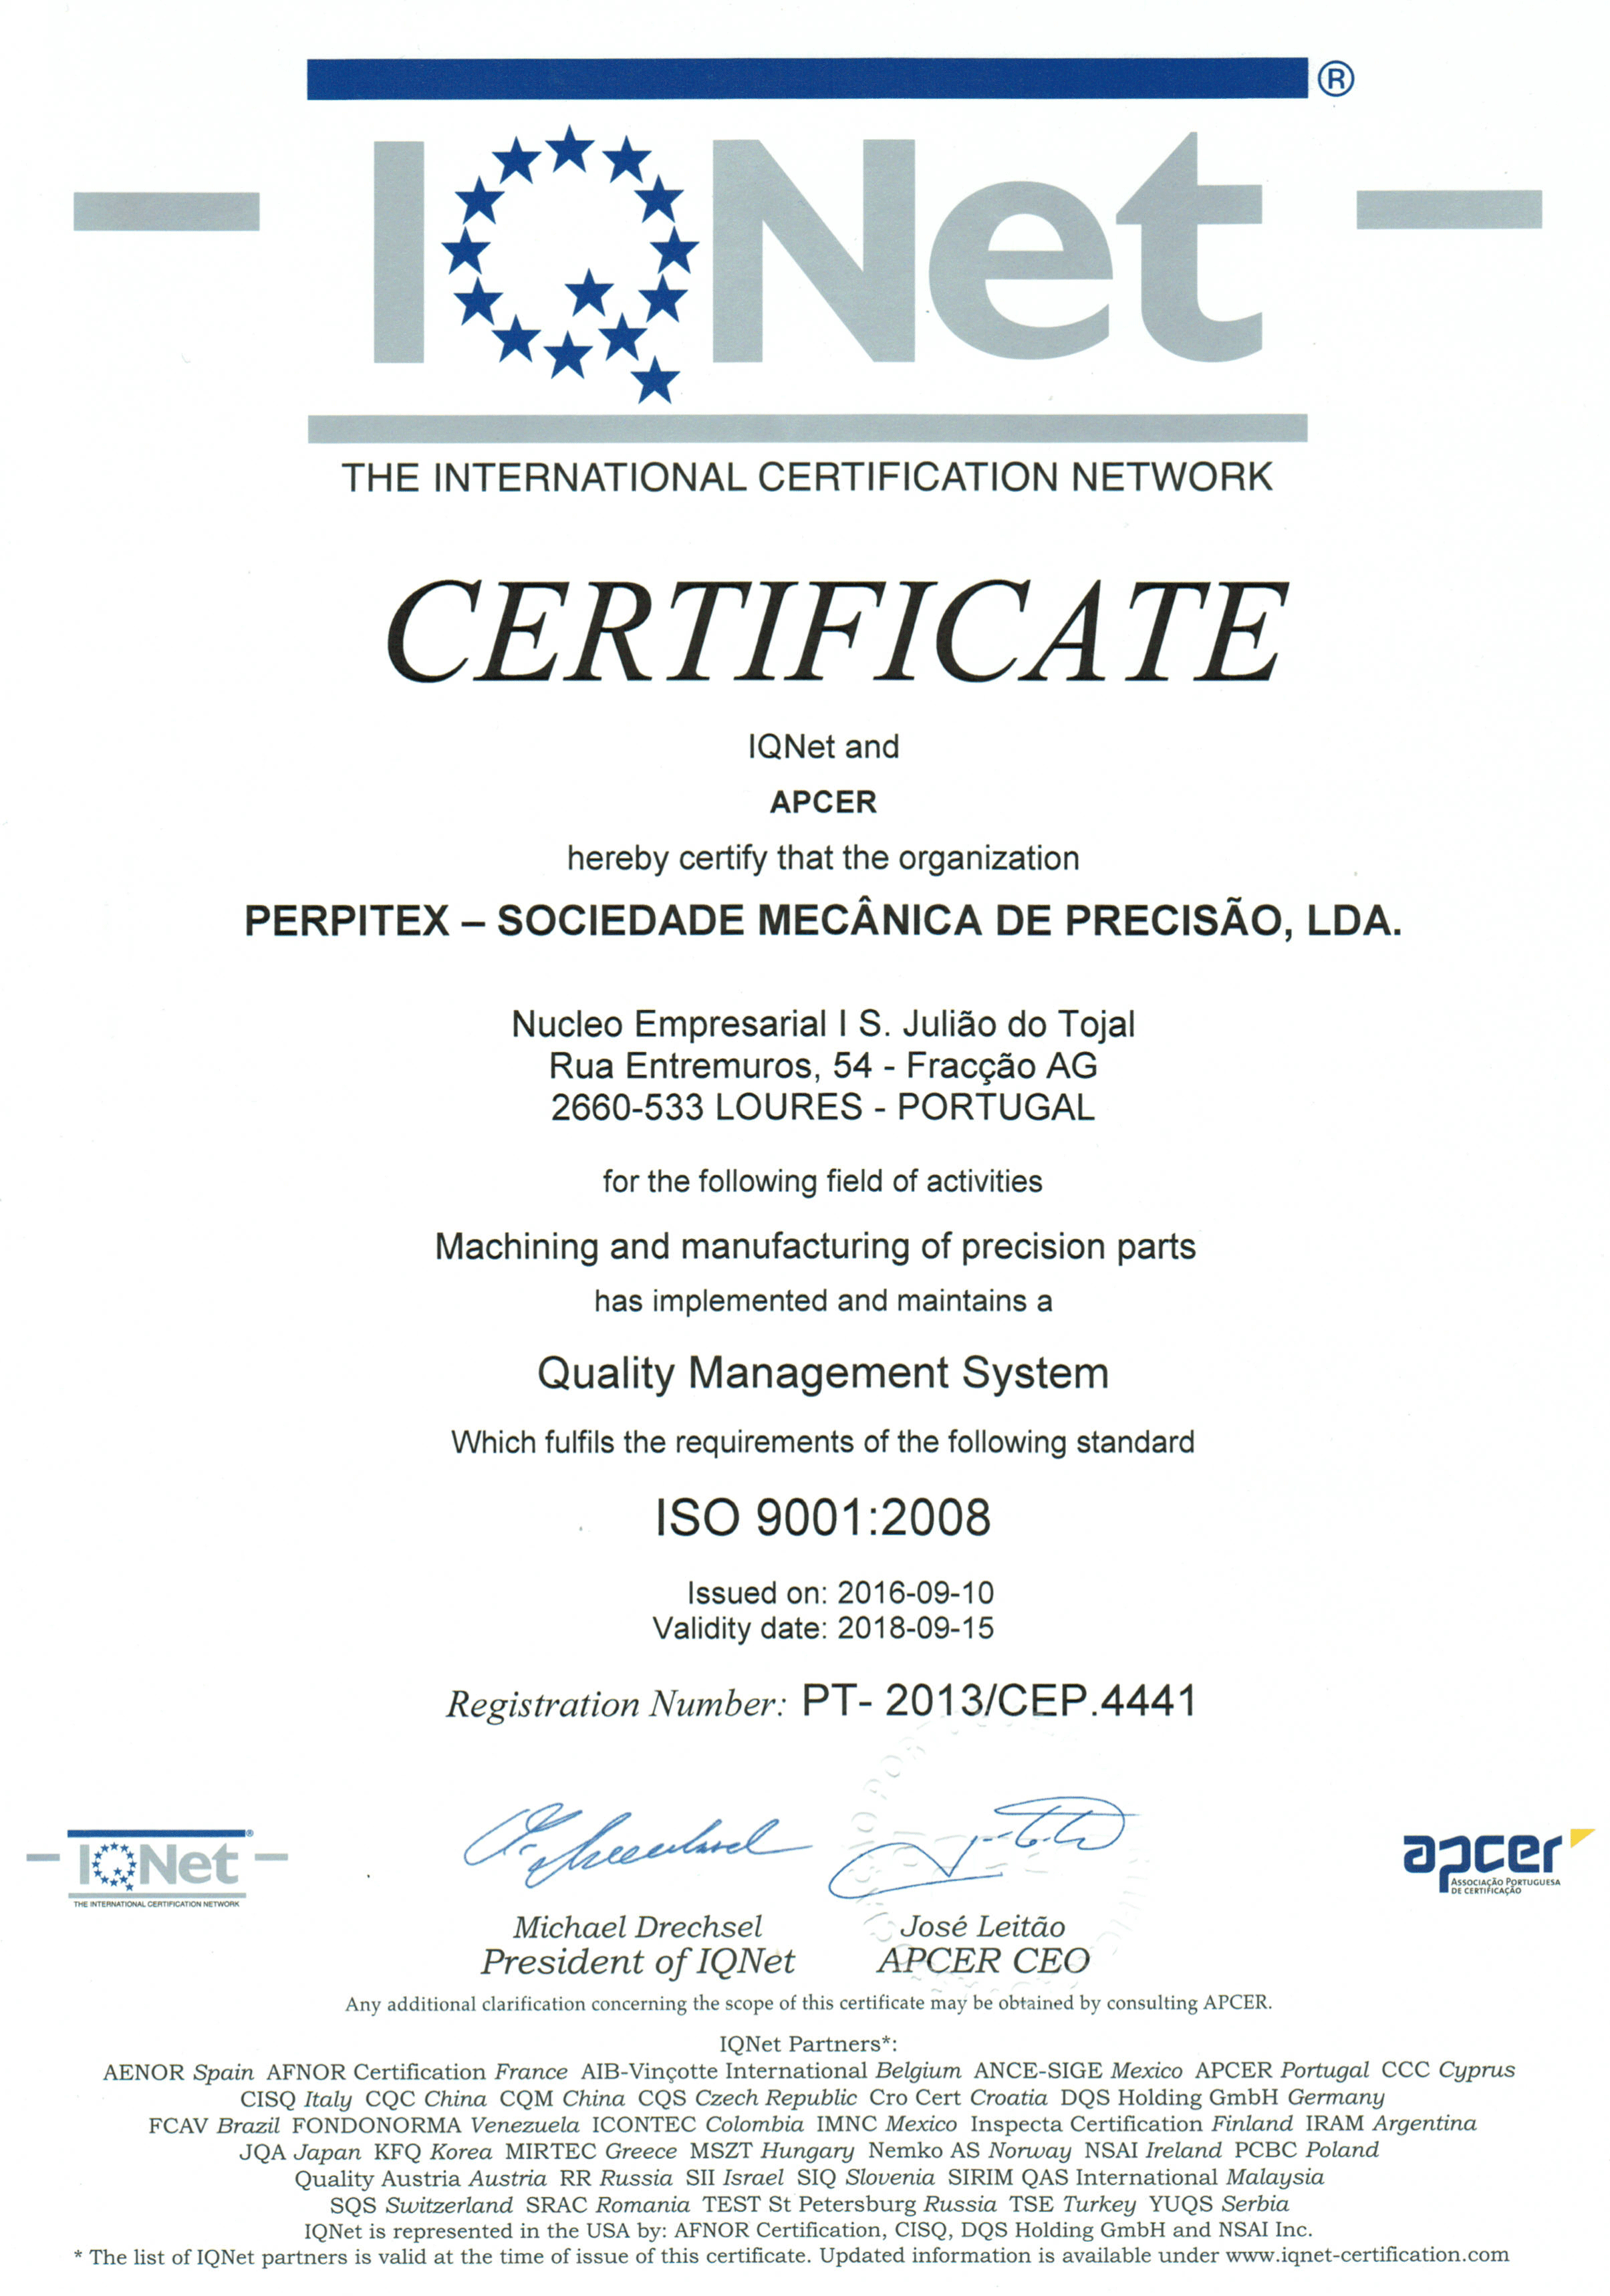 IQNET and APCER CERTIFICATE Quality Management System ISO 9001:2008 - Machining and manufacturing of precision parts